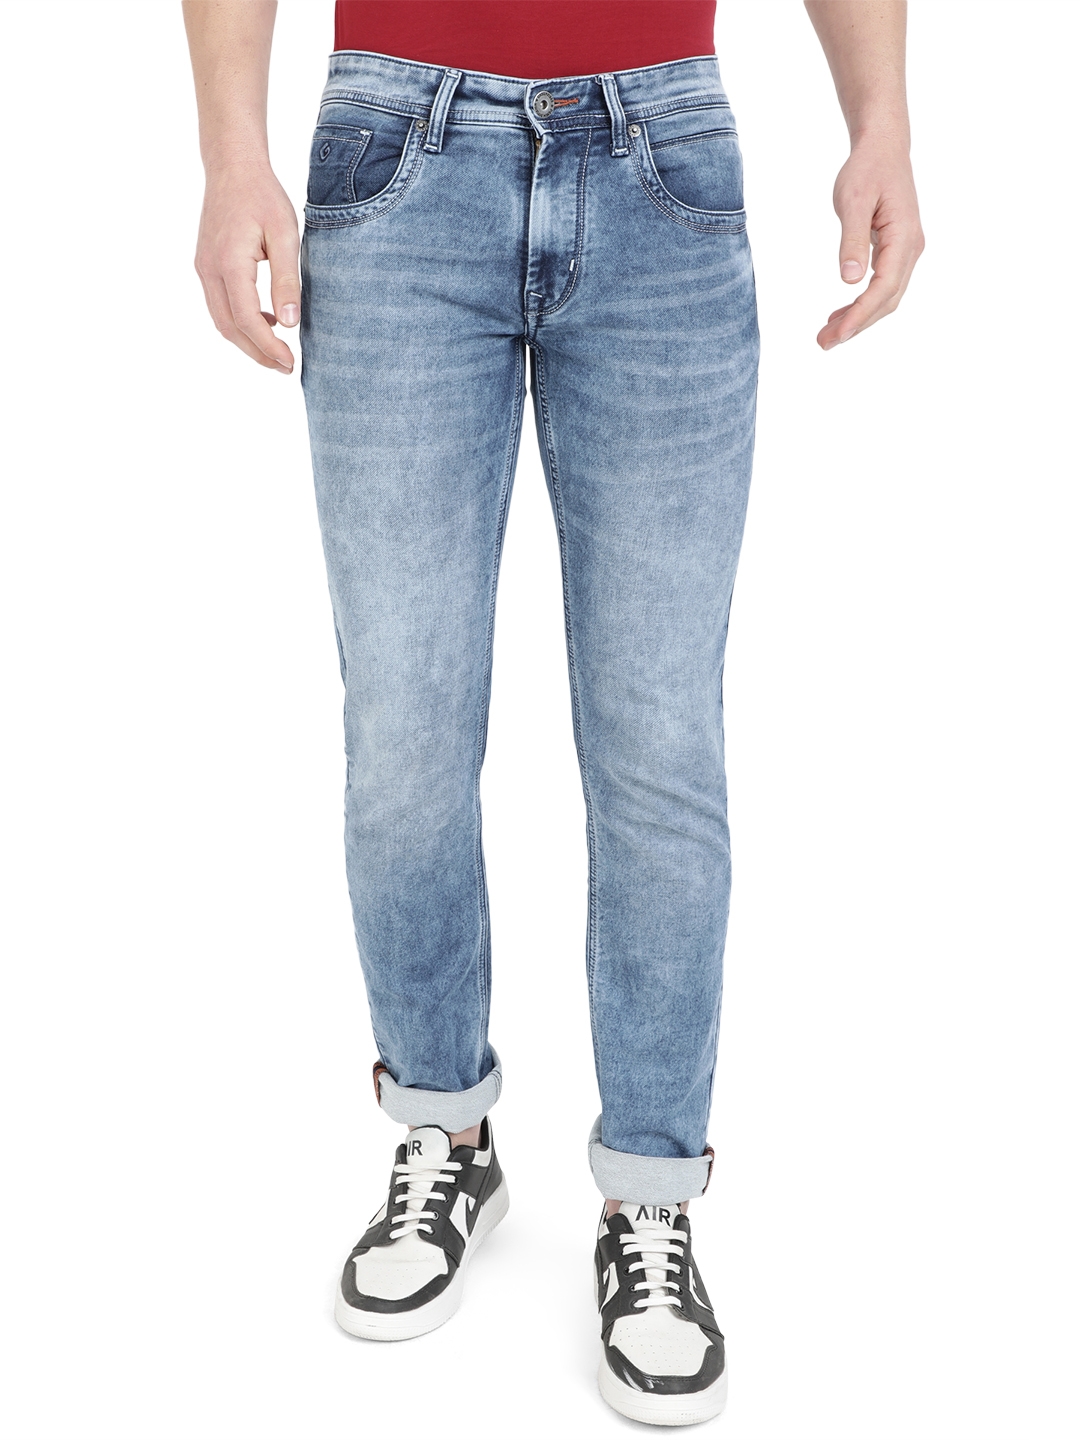 Greenfibre | Light Blue Washed Narrow Fit Jeans | Greenfibre